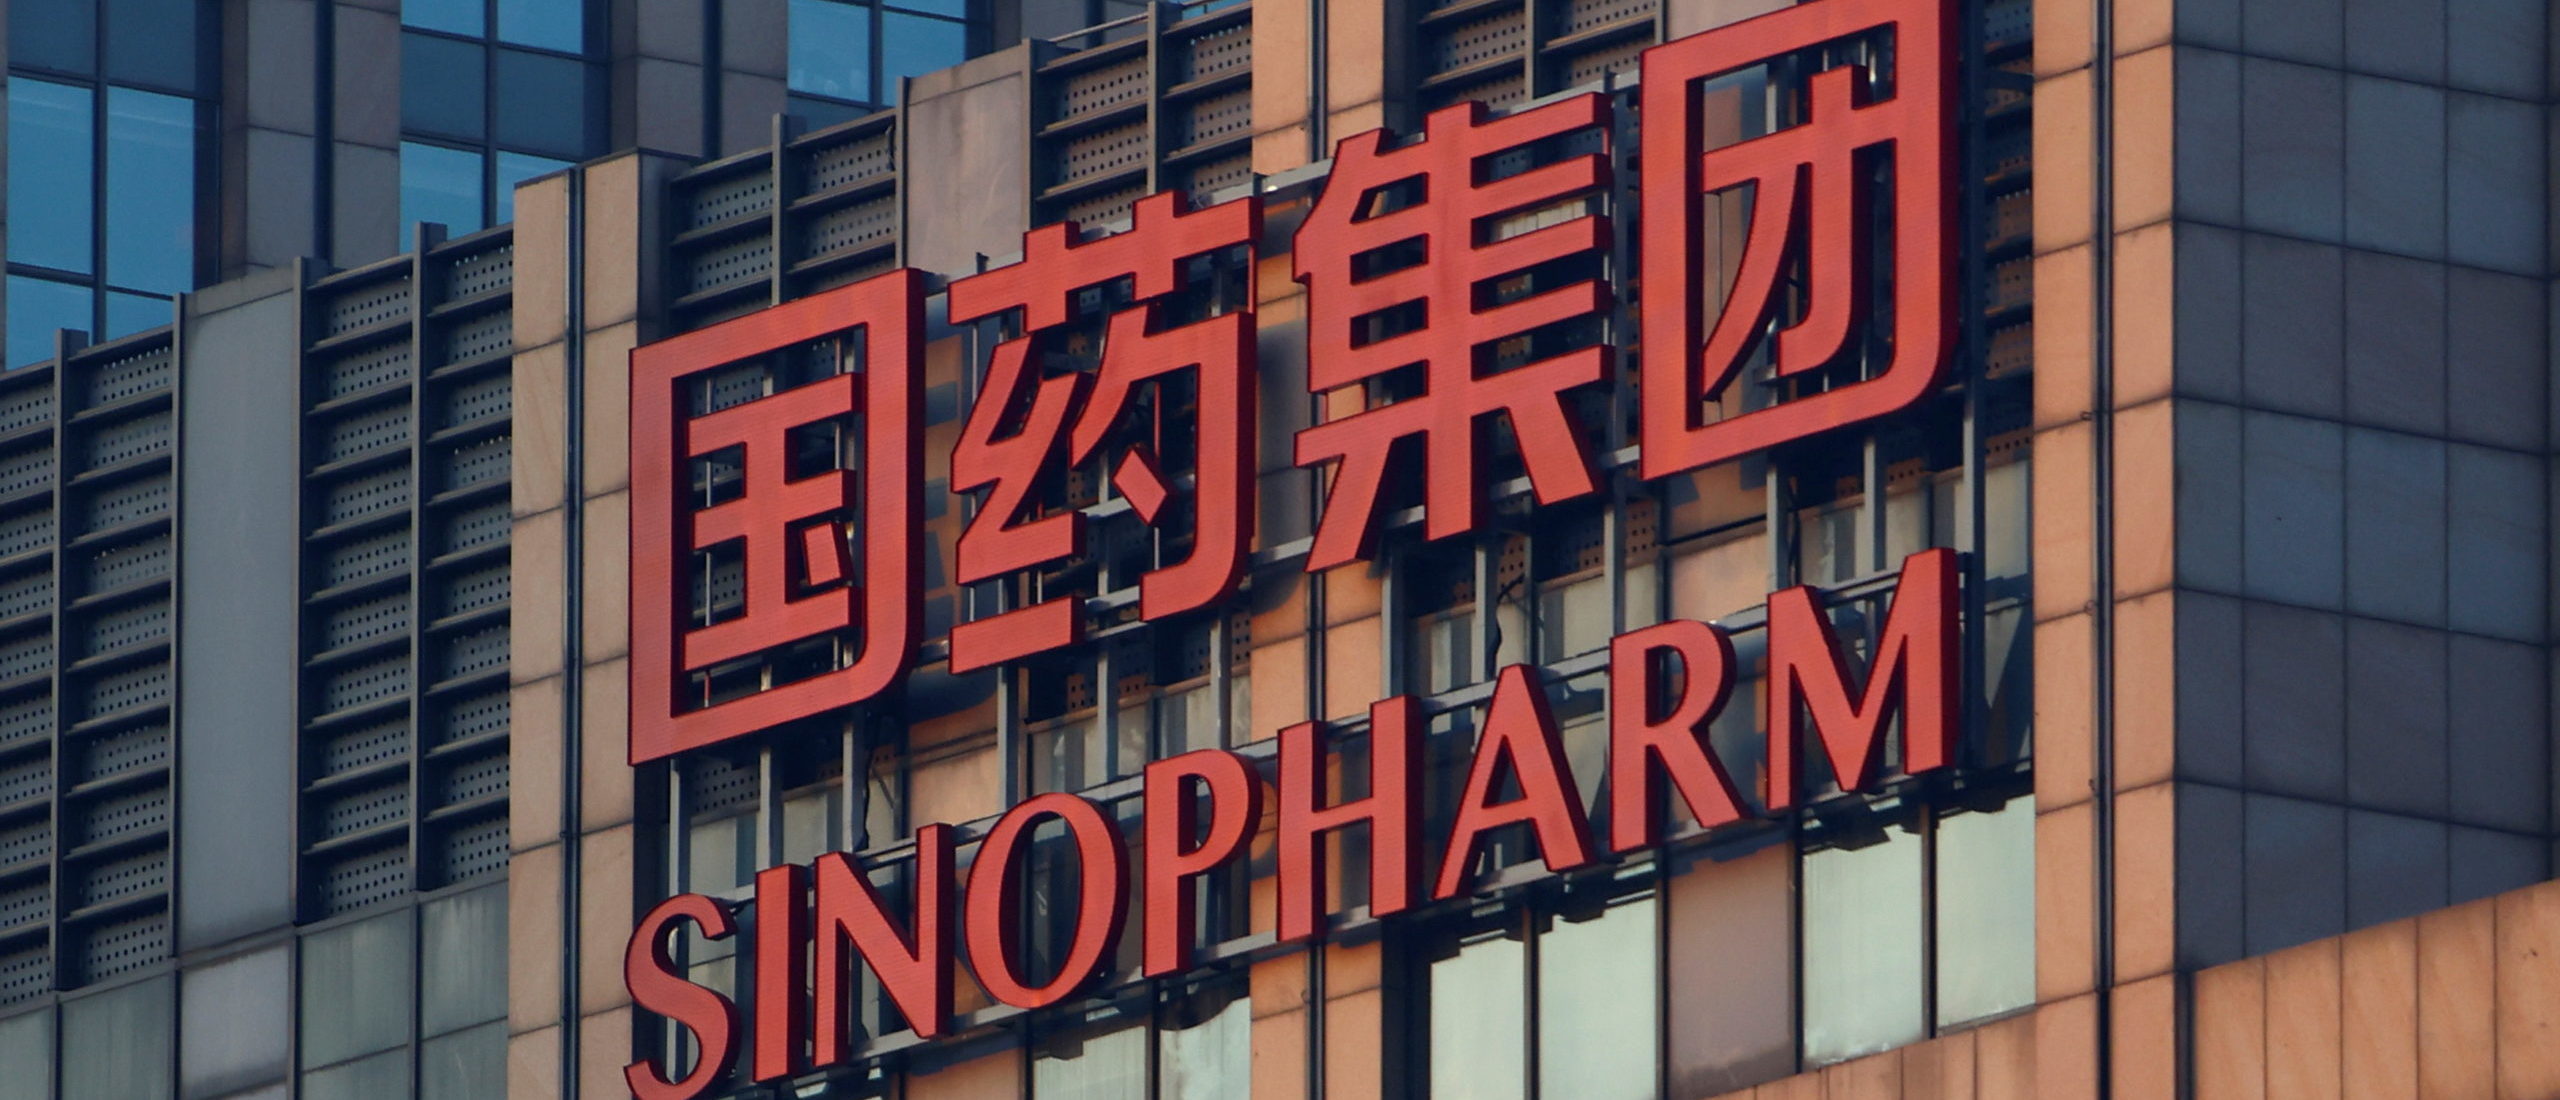 Sinopharm is China's national pharmaceutical group. (REUTERS/Fabrizio Bensch)